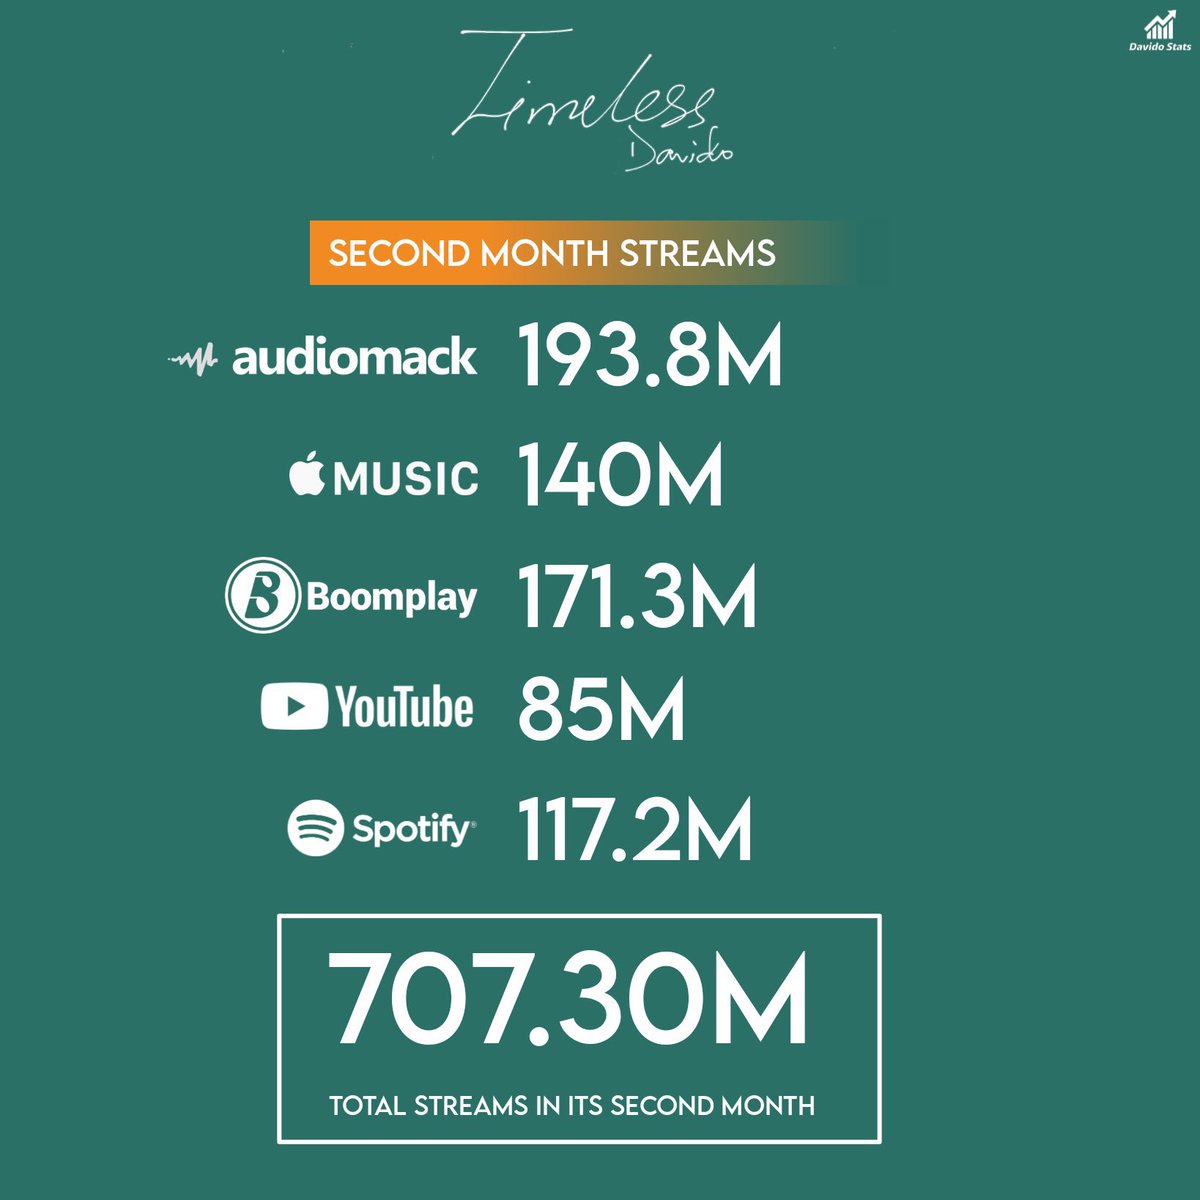 Timeless is less than 300m streams to hit  1 billion streams  in 2months😳🤯

This how you know you dropped a classic album  @davido ⏳